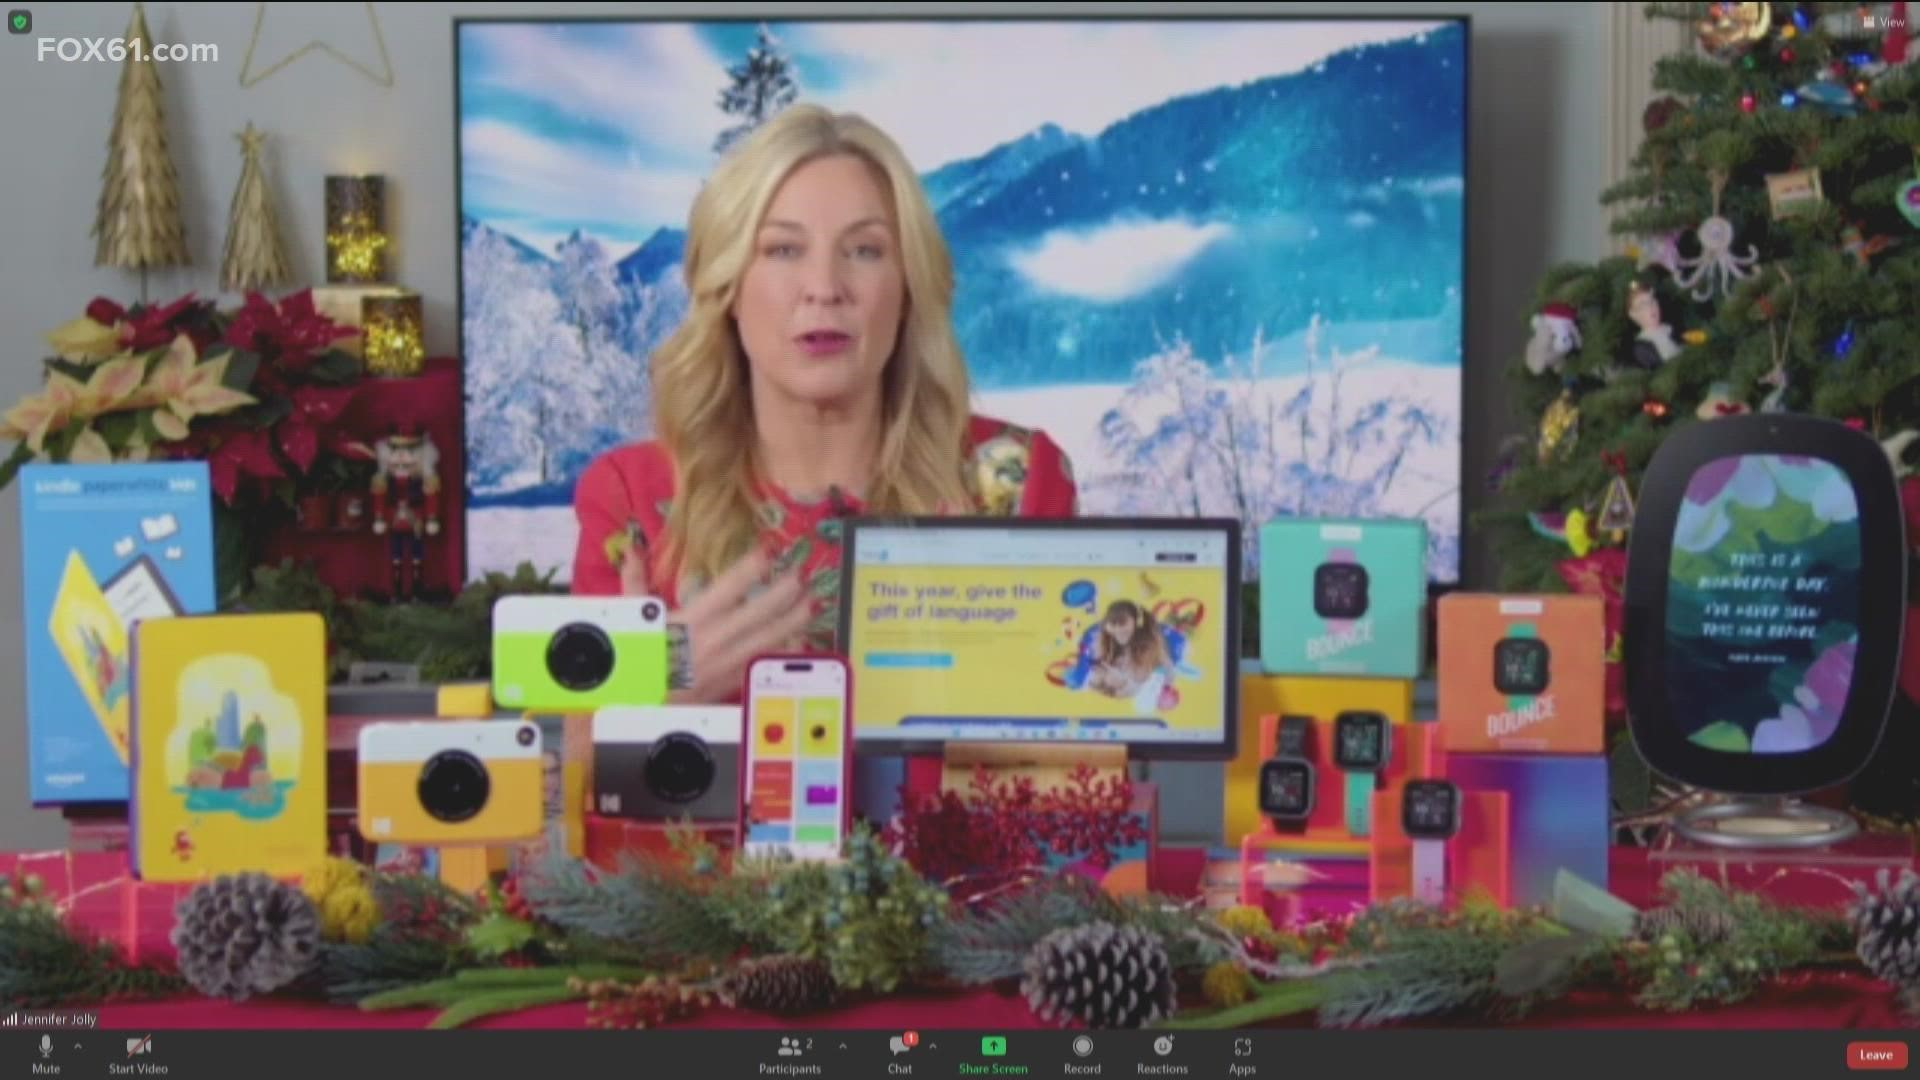 From reading tablets to instant cameras, Jennifer Jolly shares what top gadgets and tech tools to consider gifting this holiday season.